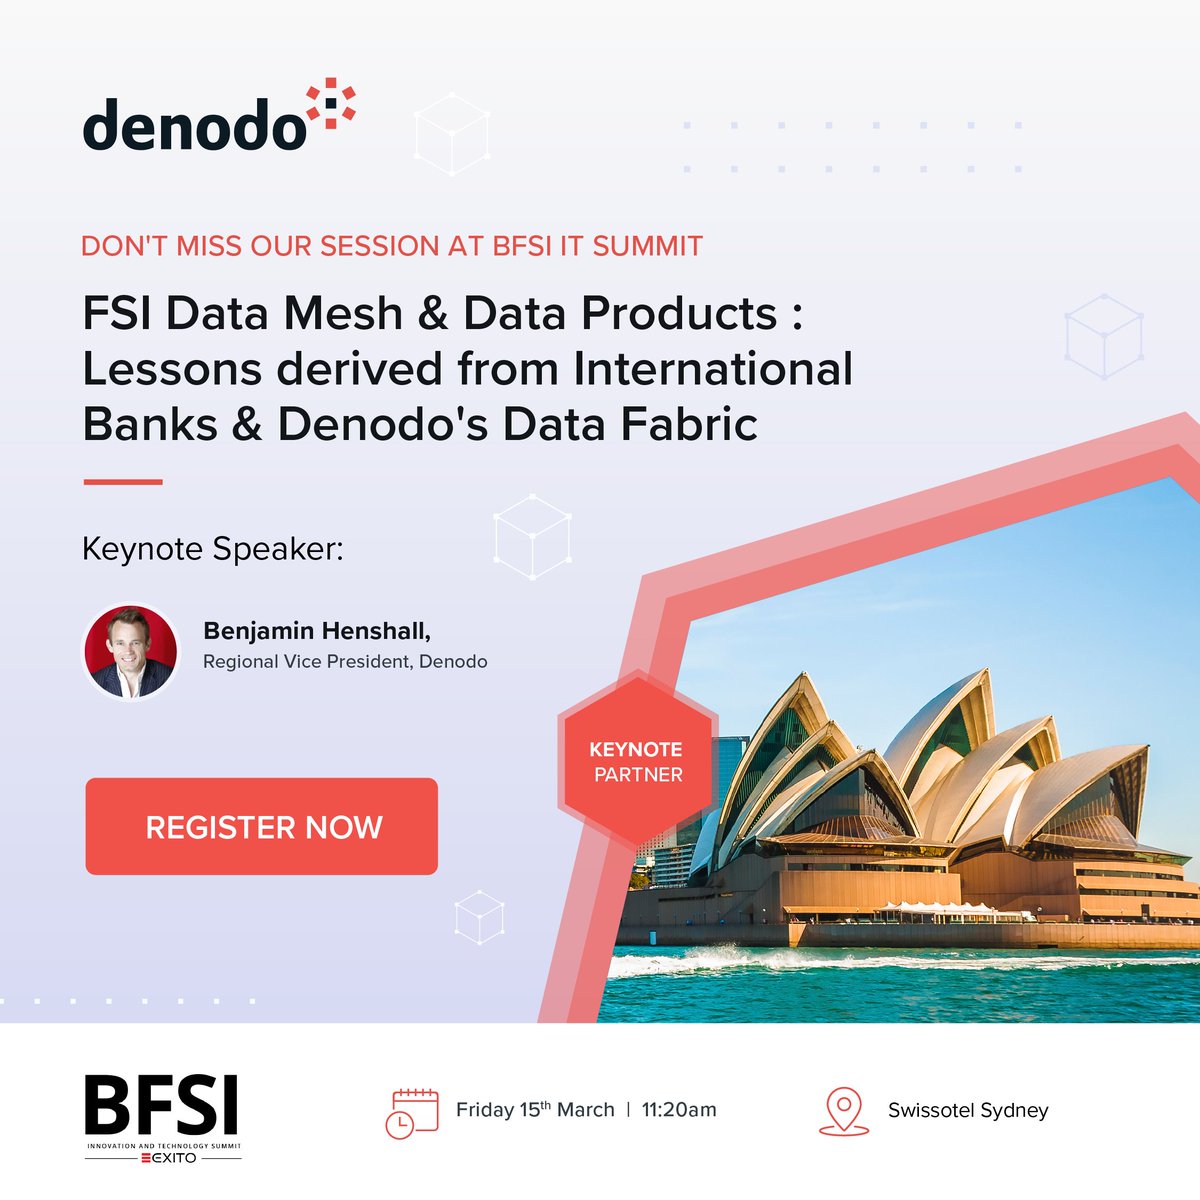 #Denodo is Keynote Partner sponsor at BFSI IT Summit by @ExitoEvents. Join our session 'FSI Data Mesh & Data Products: Lessons derived from International Banks & Denodo's Data Fabric' by Benjamin Henshall. Come by our booth to learn more! buff.ly/3vccs8p #BFSI2024